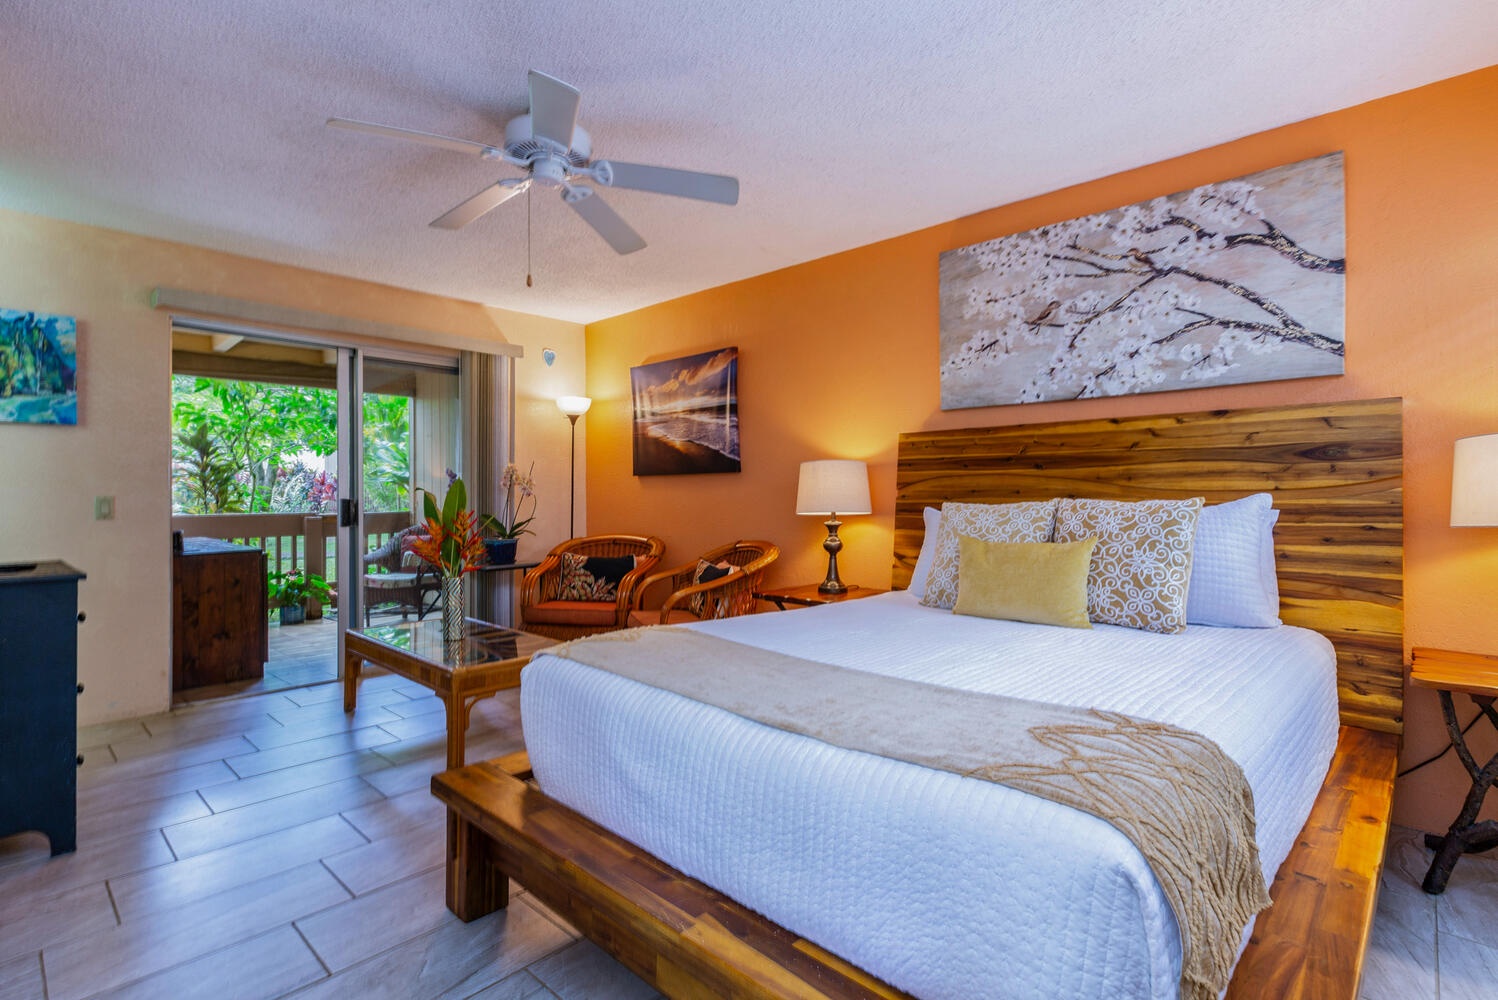 Princeville Vacation Rentals, Hideaway Haven Suite - Retreat to a suite that boasts its own cozy living area, offering the perfect blend of comfort and privacy for your relaxation.